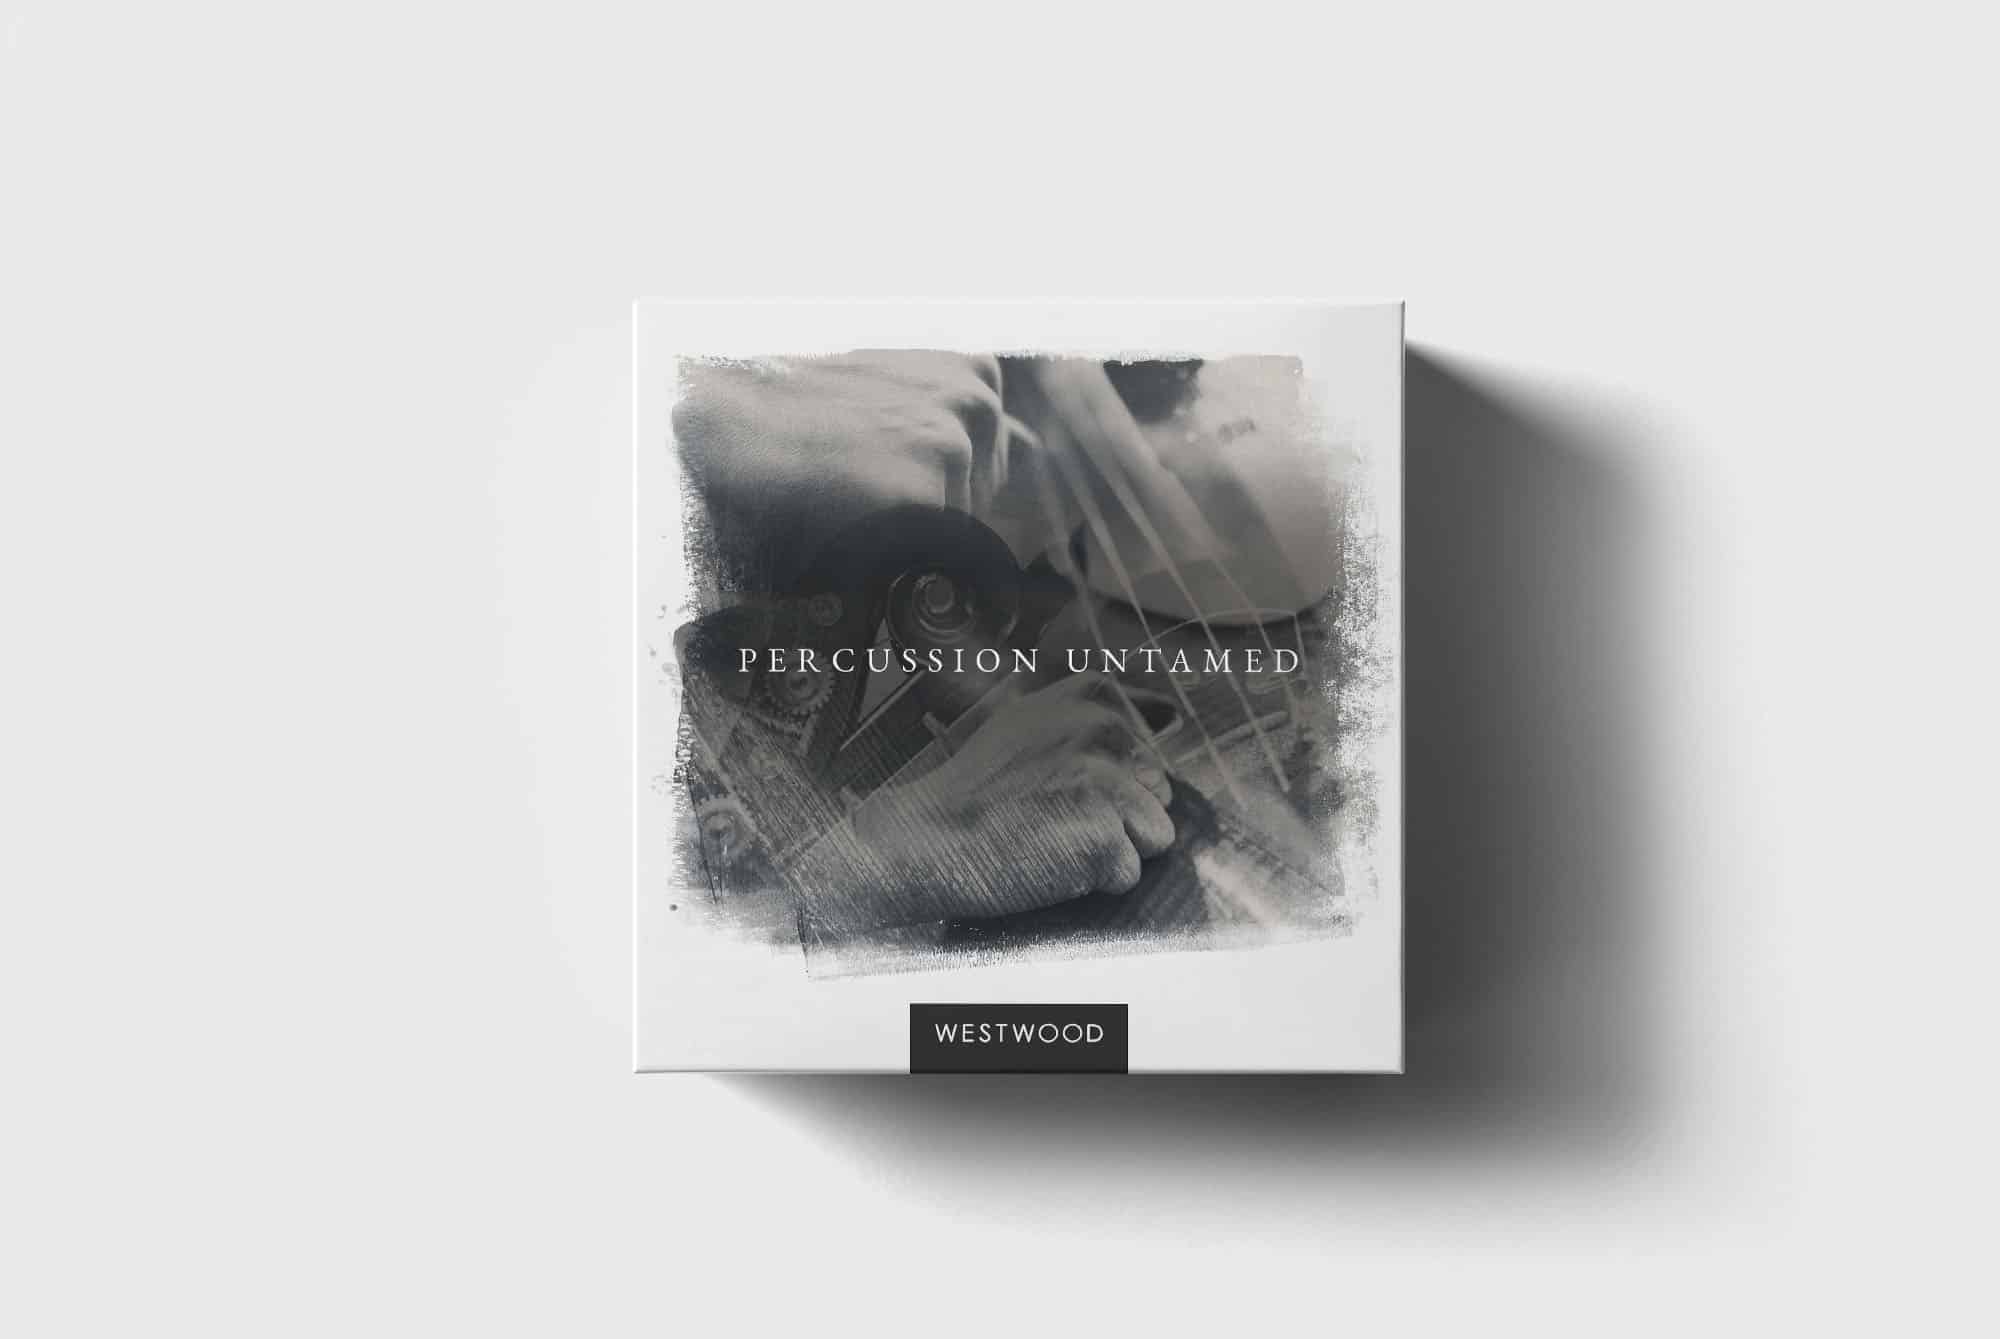 WESTWOOD Releases Percussion Untamed